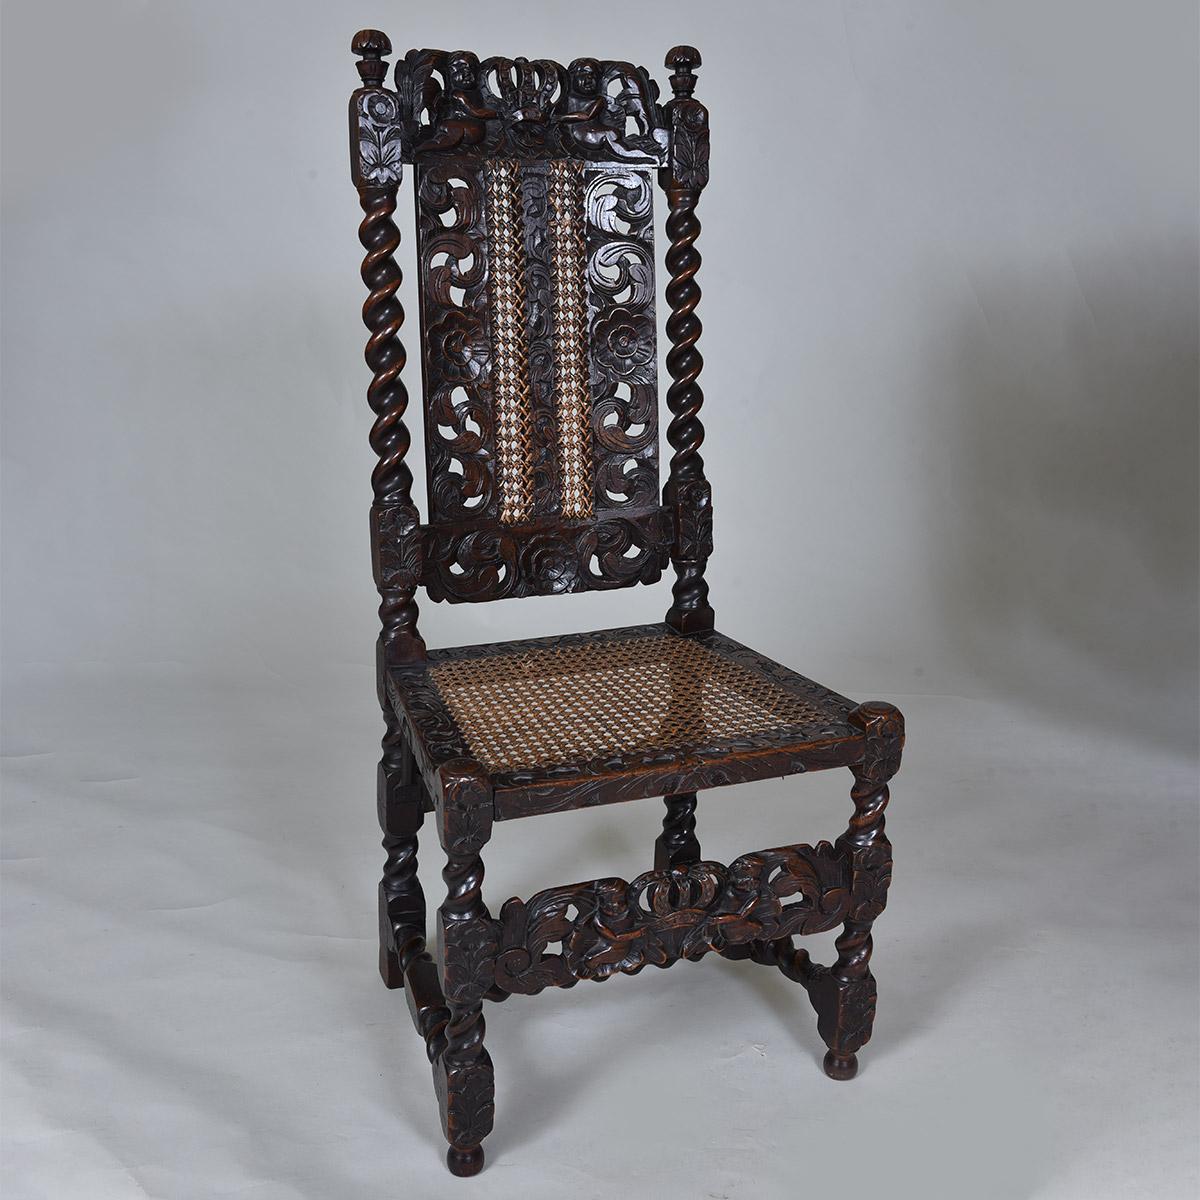 17th century side chairs